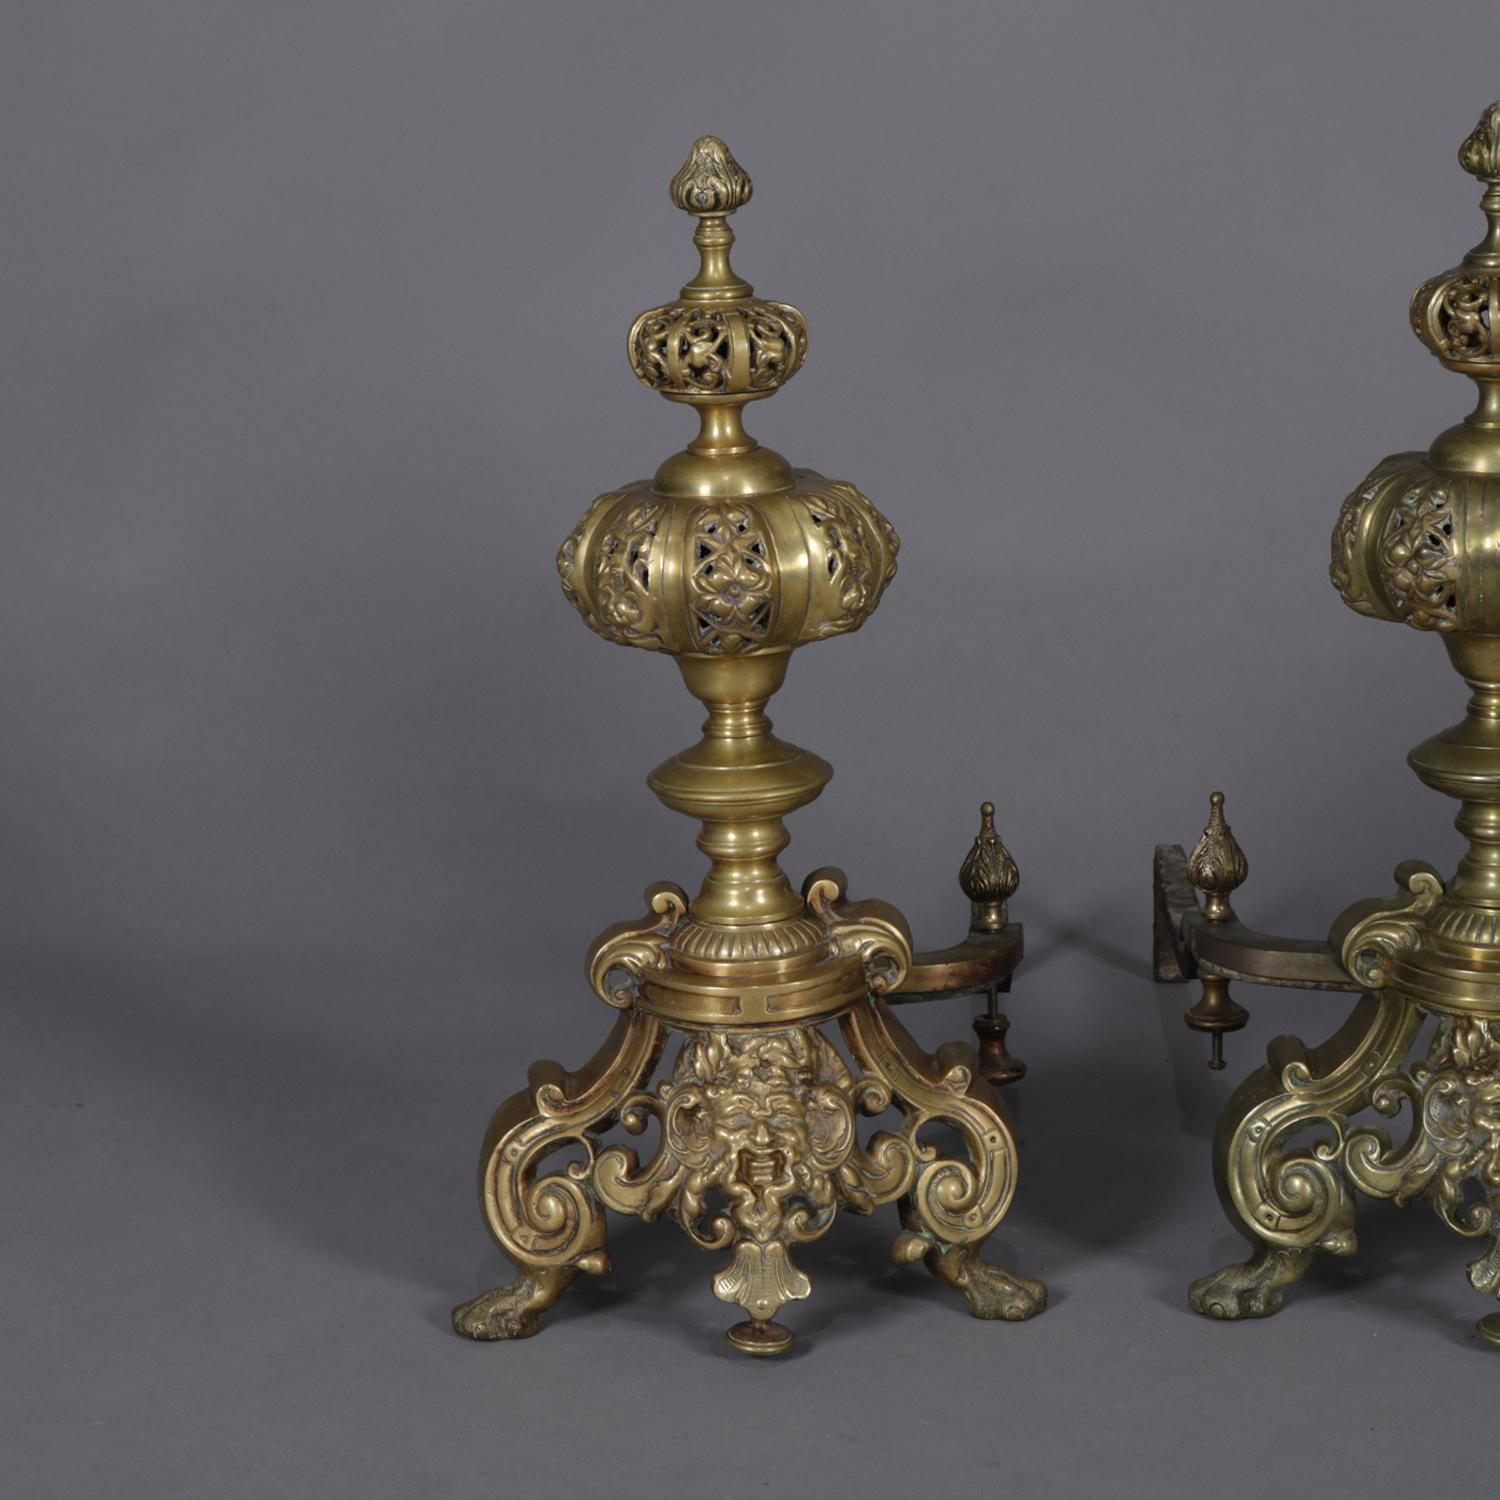 19th Century Pair of Oversized French Baroque Brass Fireplace Chenet Andirons with Masks